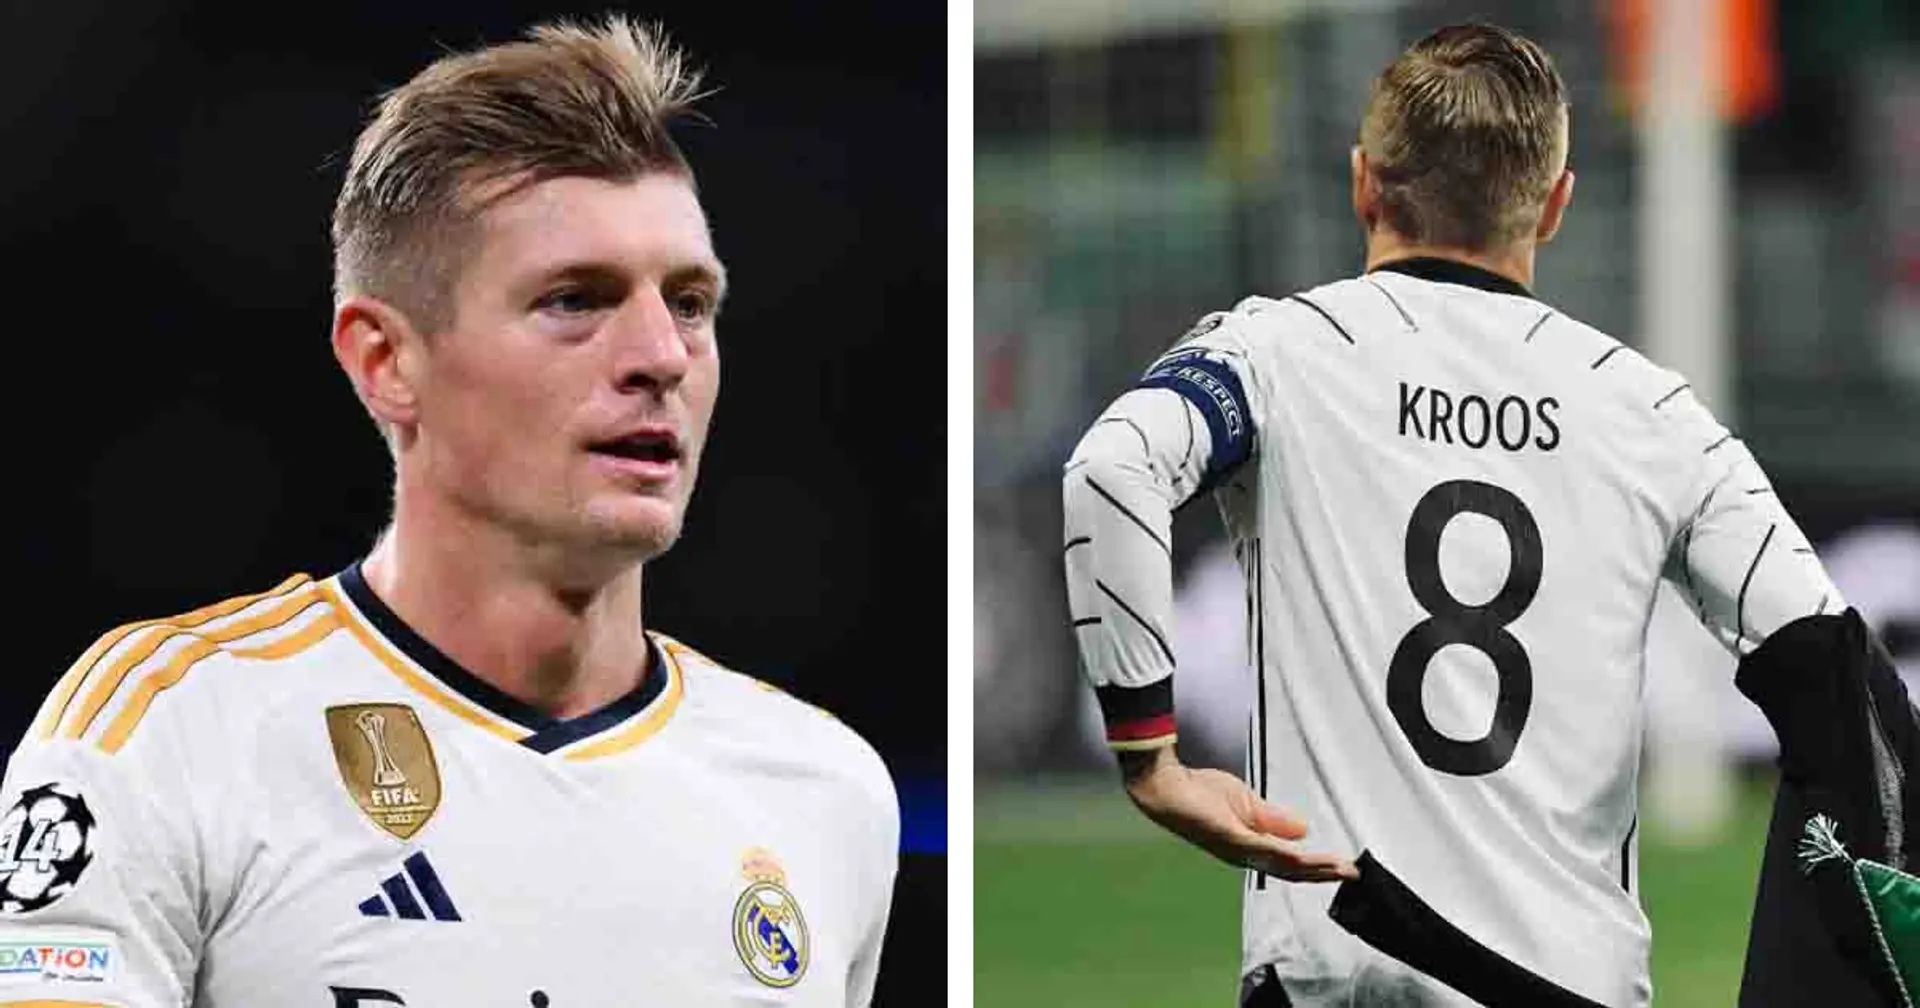 Toni Kroos confirms return to Germany NT before Euro 2024, reveals reason for ending international retirement